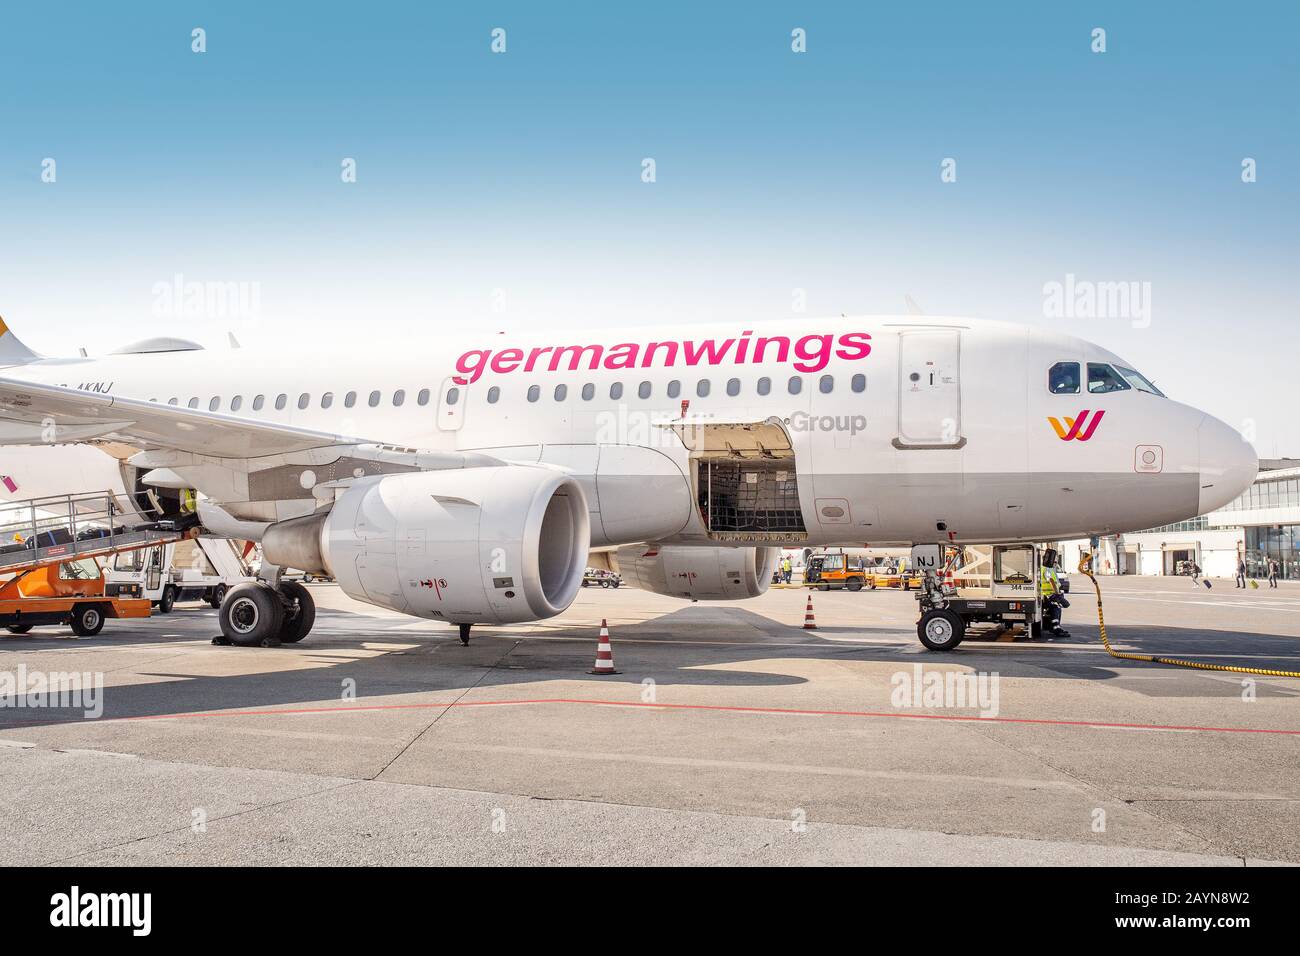 PISA, ITALY - 14 October , 2018: German wings Aircraft at the airport parking waiting for luggage being loaded Stock Photo